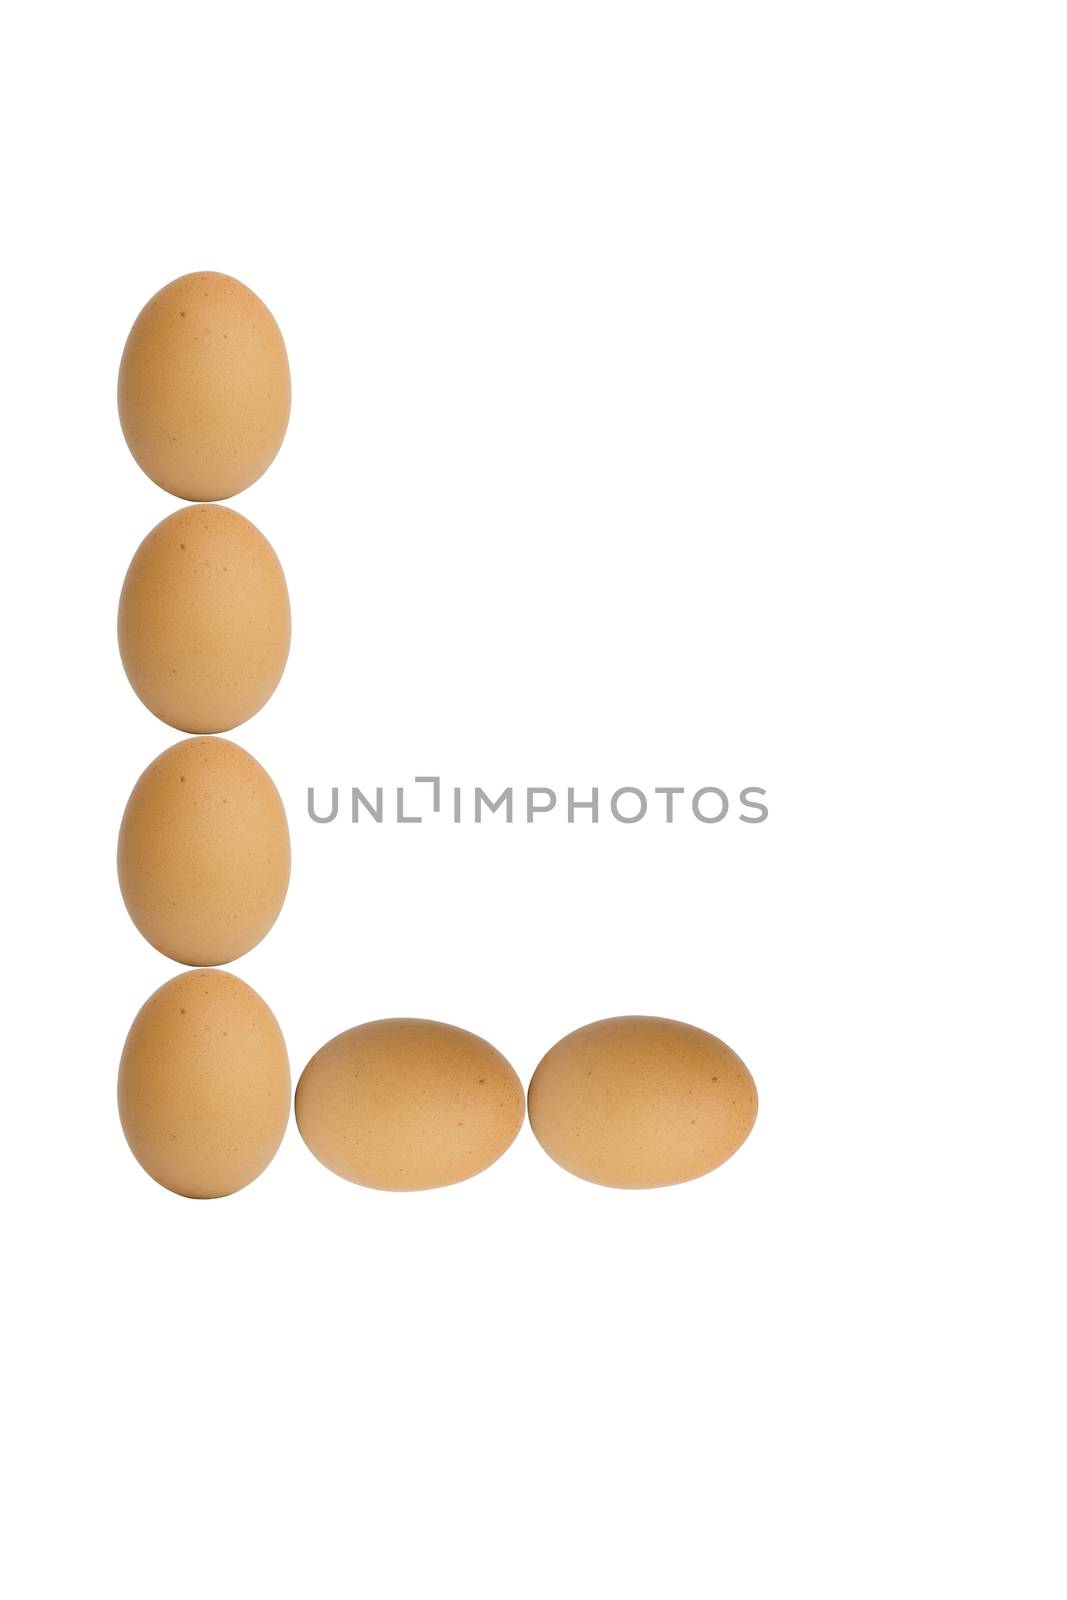 Alphabets  A to Z from brown eggs alphabet isolated on white background, L